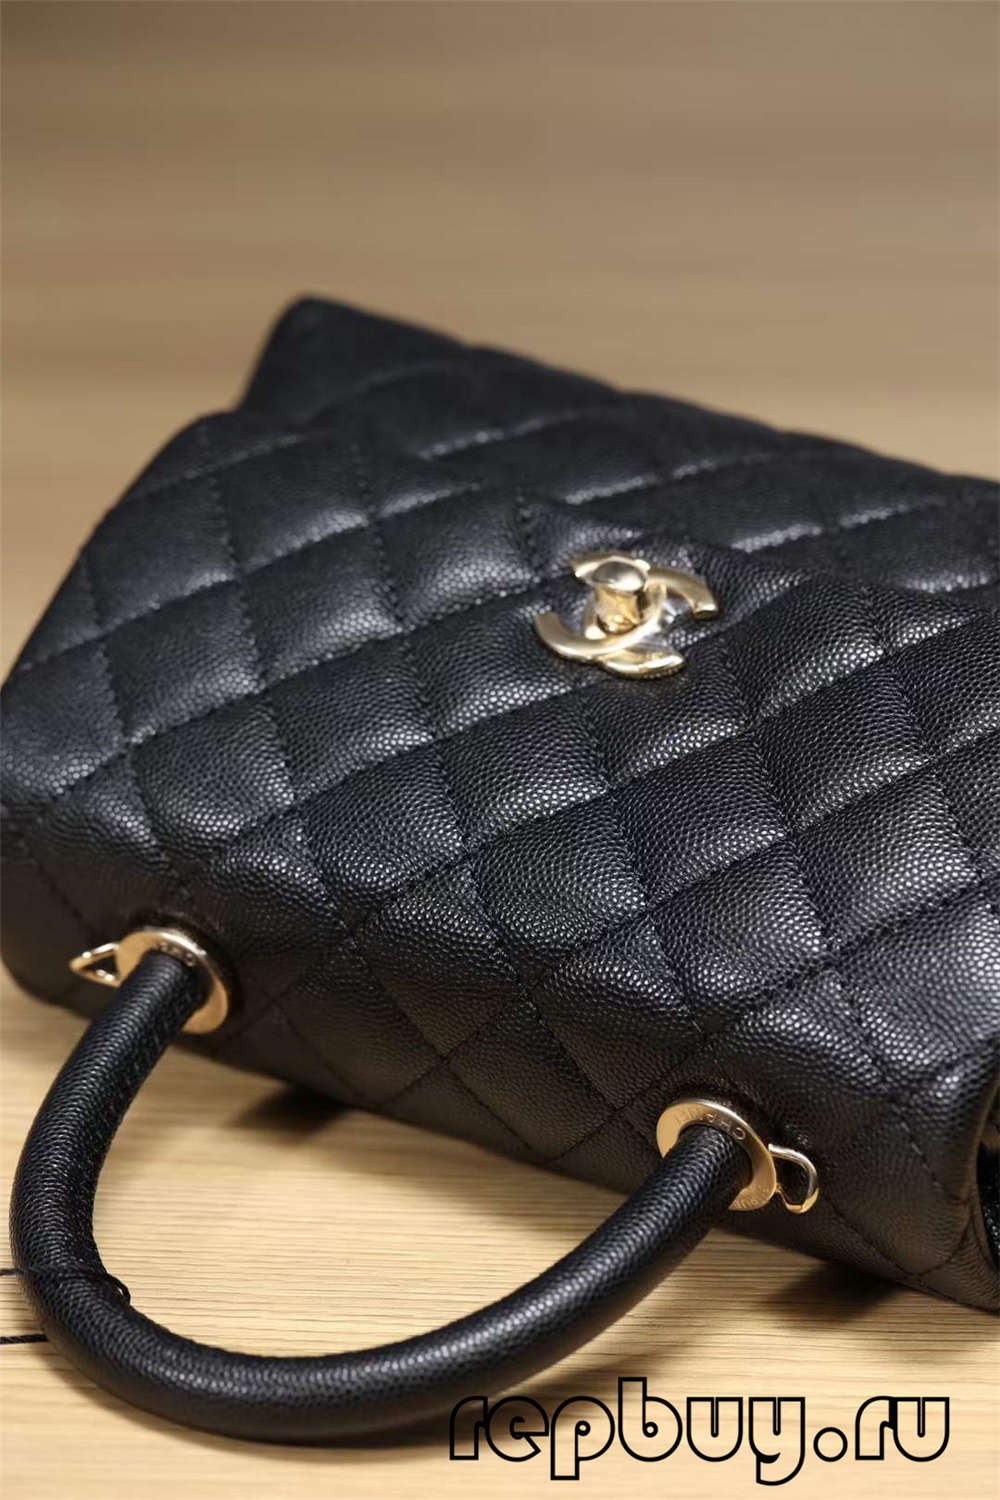 Chanel Coco Handle Top Replica Handbag Black Gold Buckle Look (2022 Updated)-Best Quality Fake designer Bag Review, Replica designer bag ru